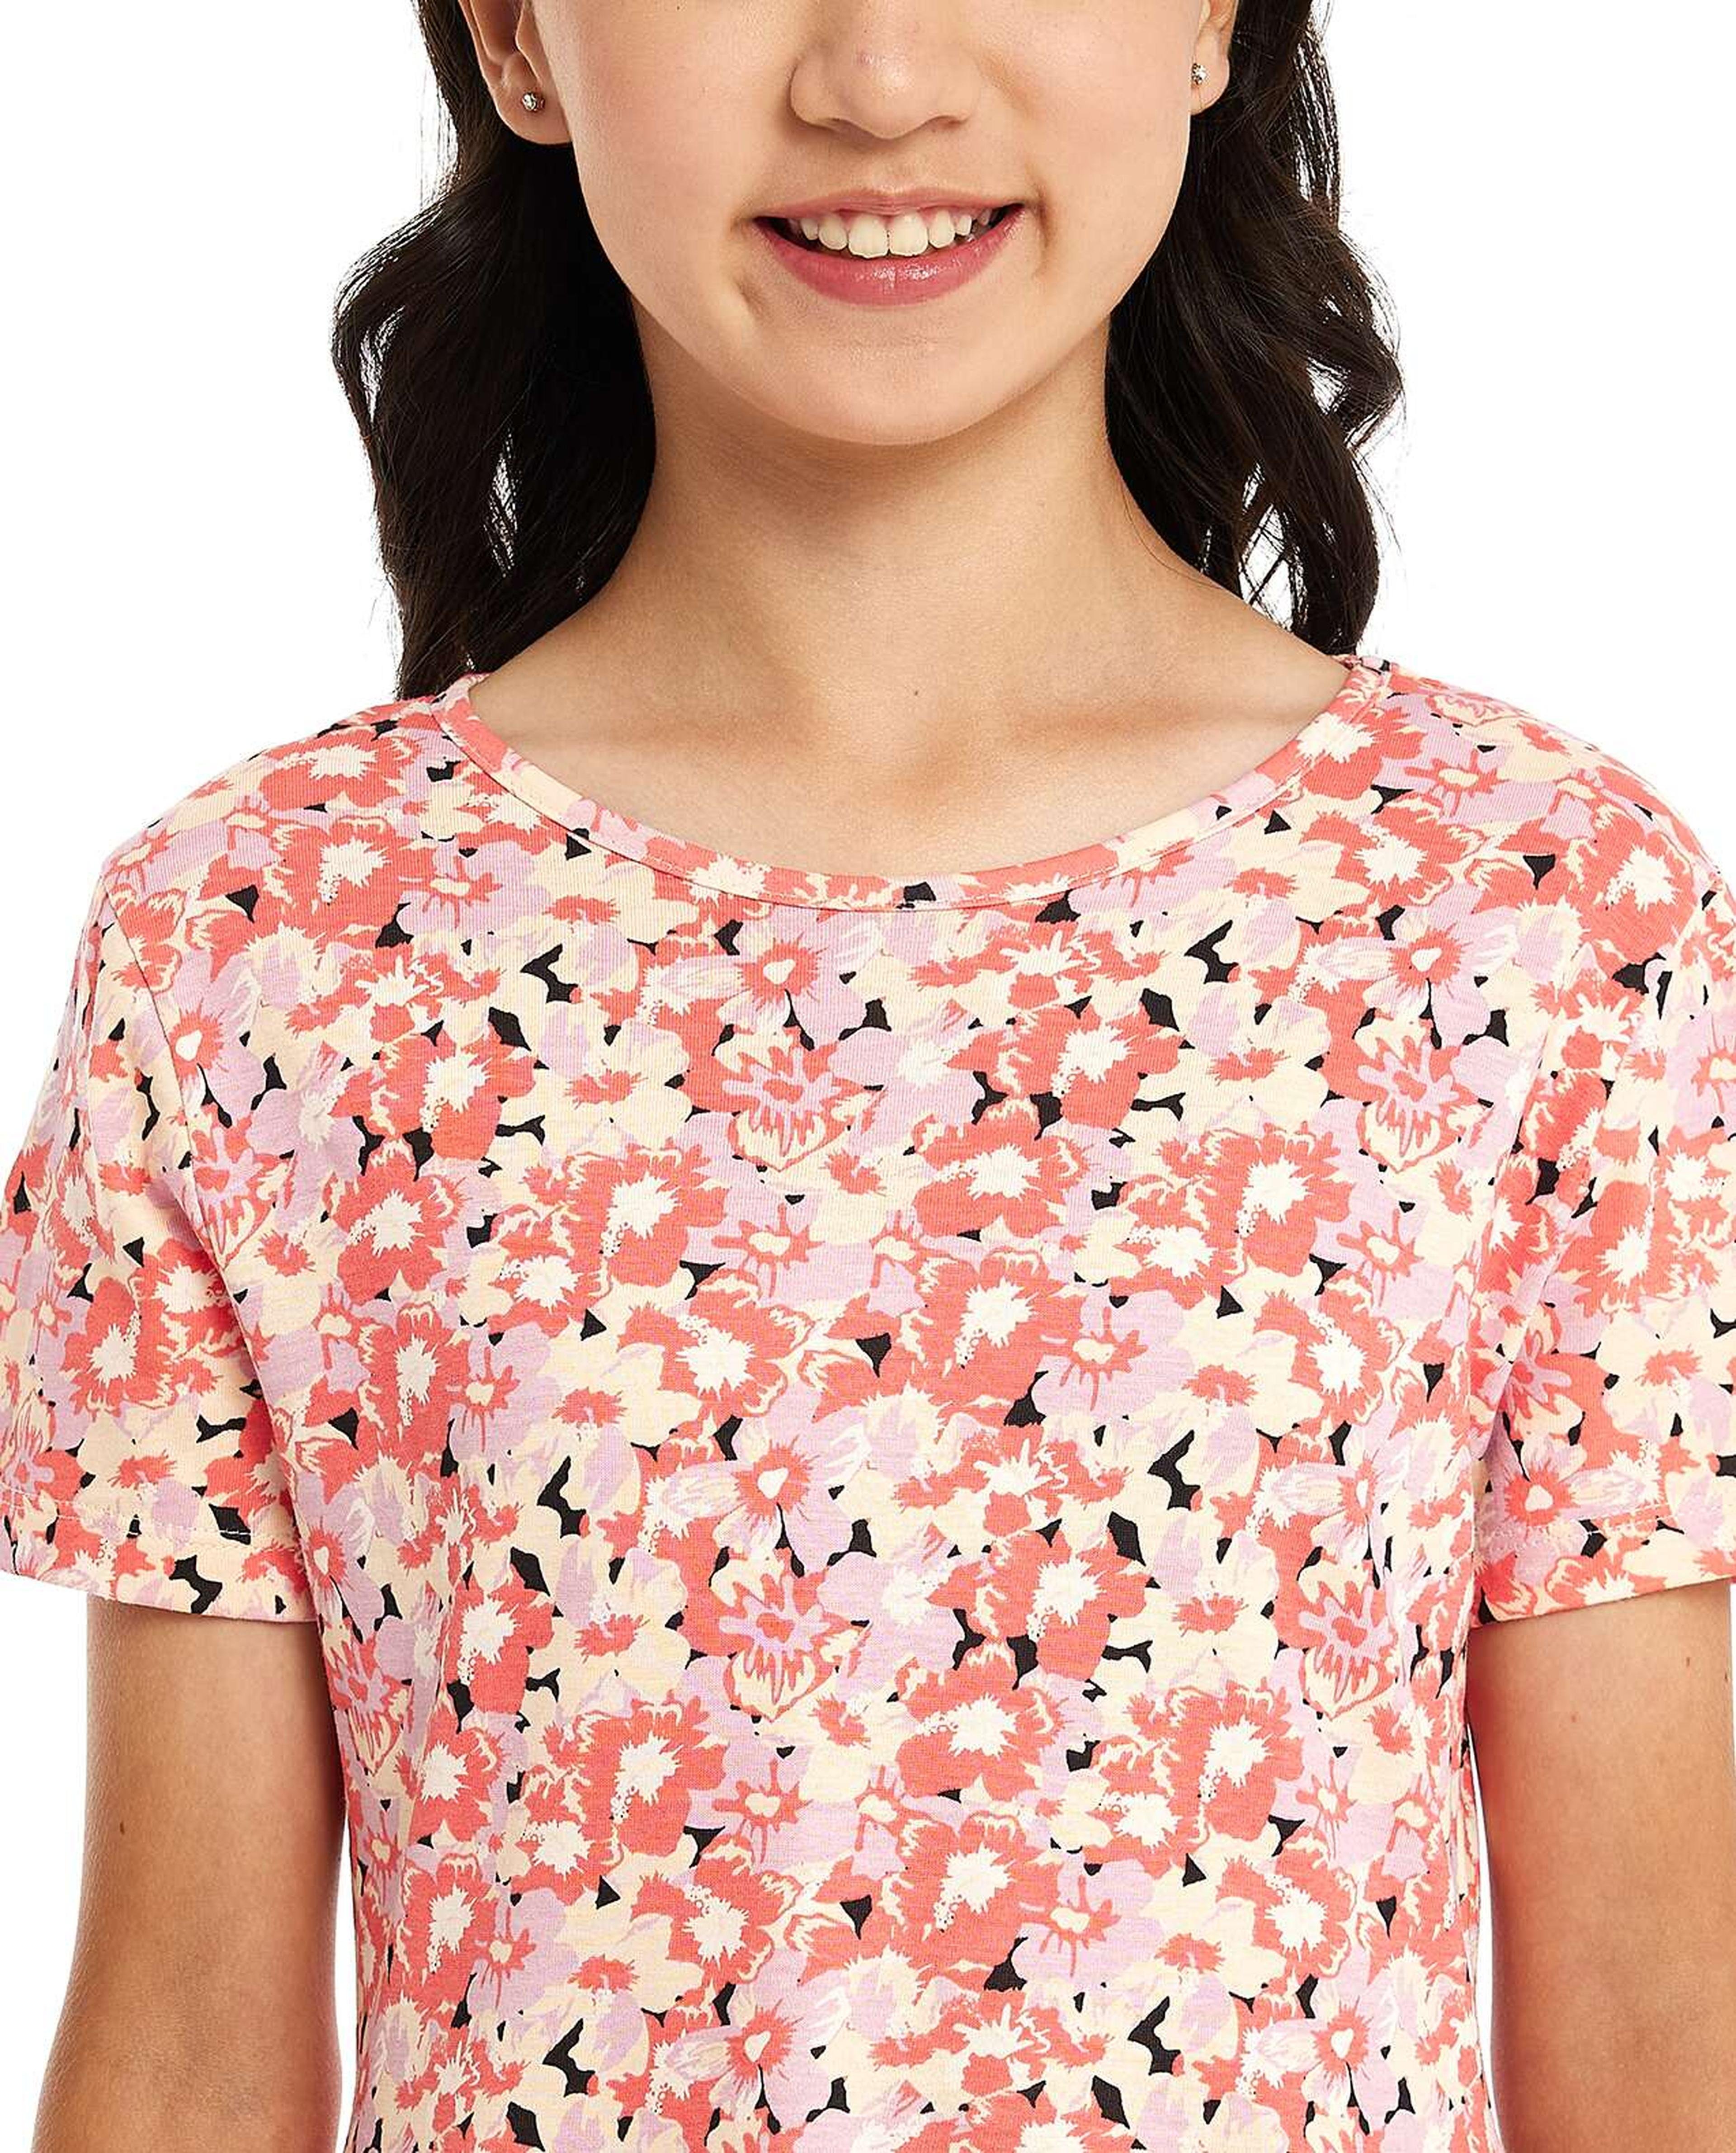 Floral Patterned Dress with Round Neck and Short Sleeves